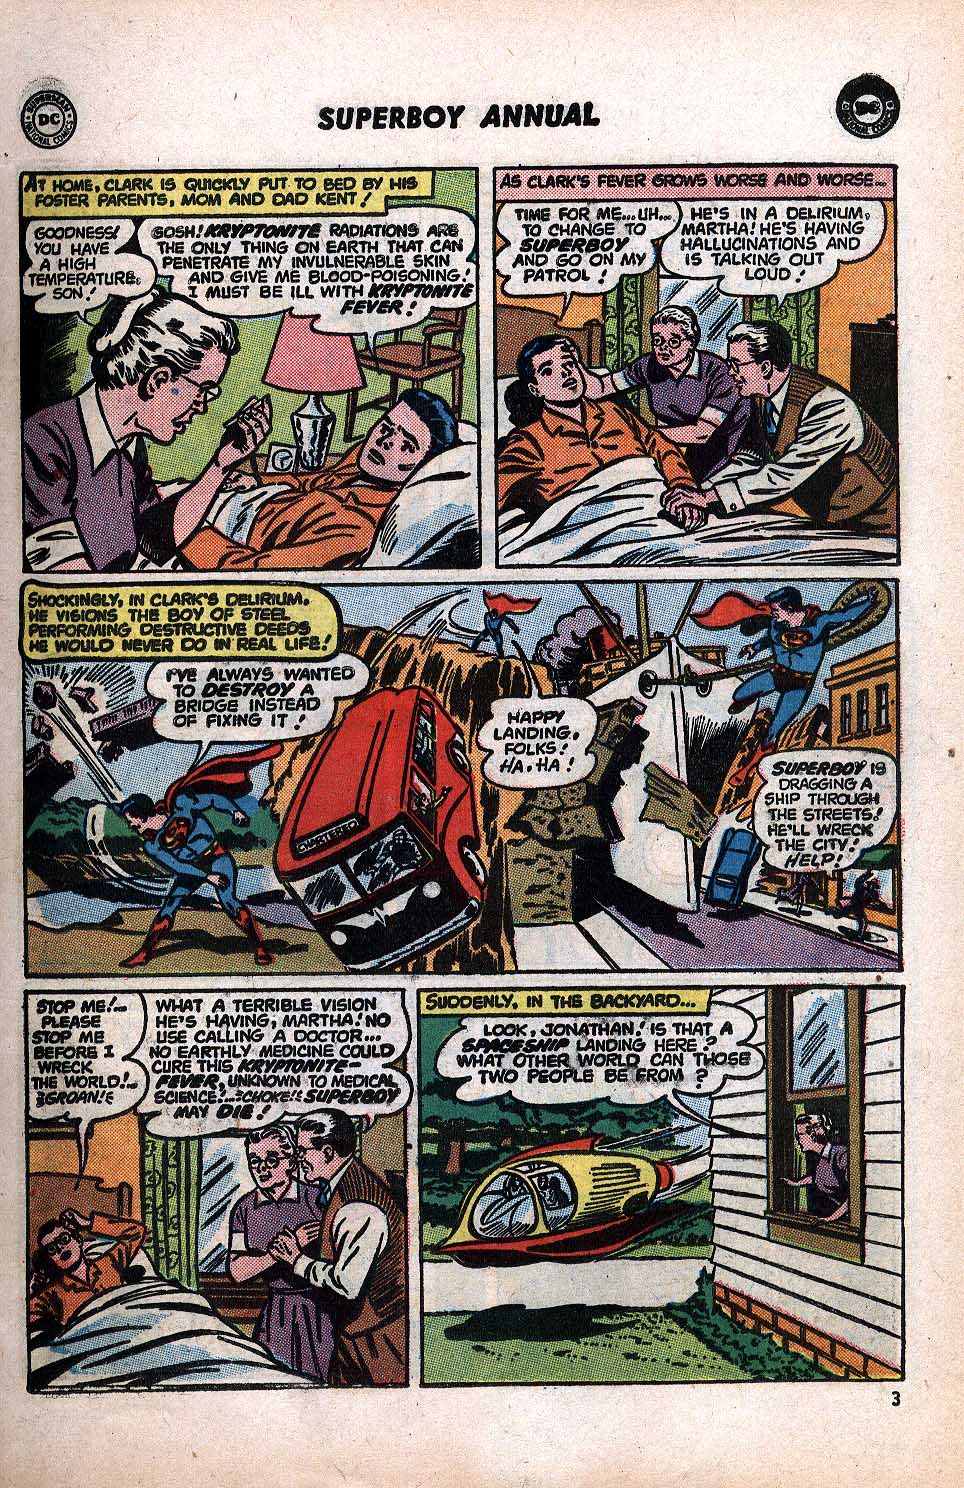 Superboy (1949) Annual_1 Page 4